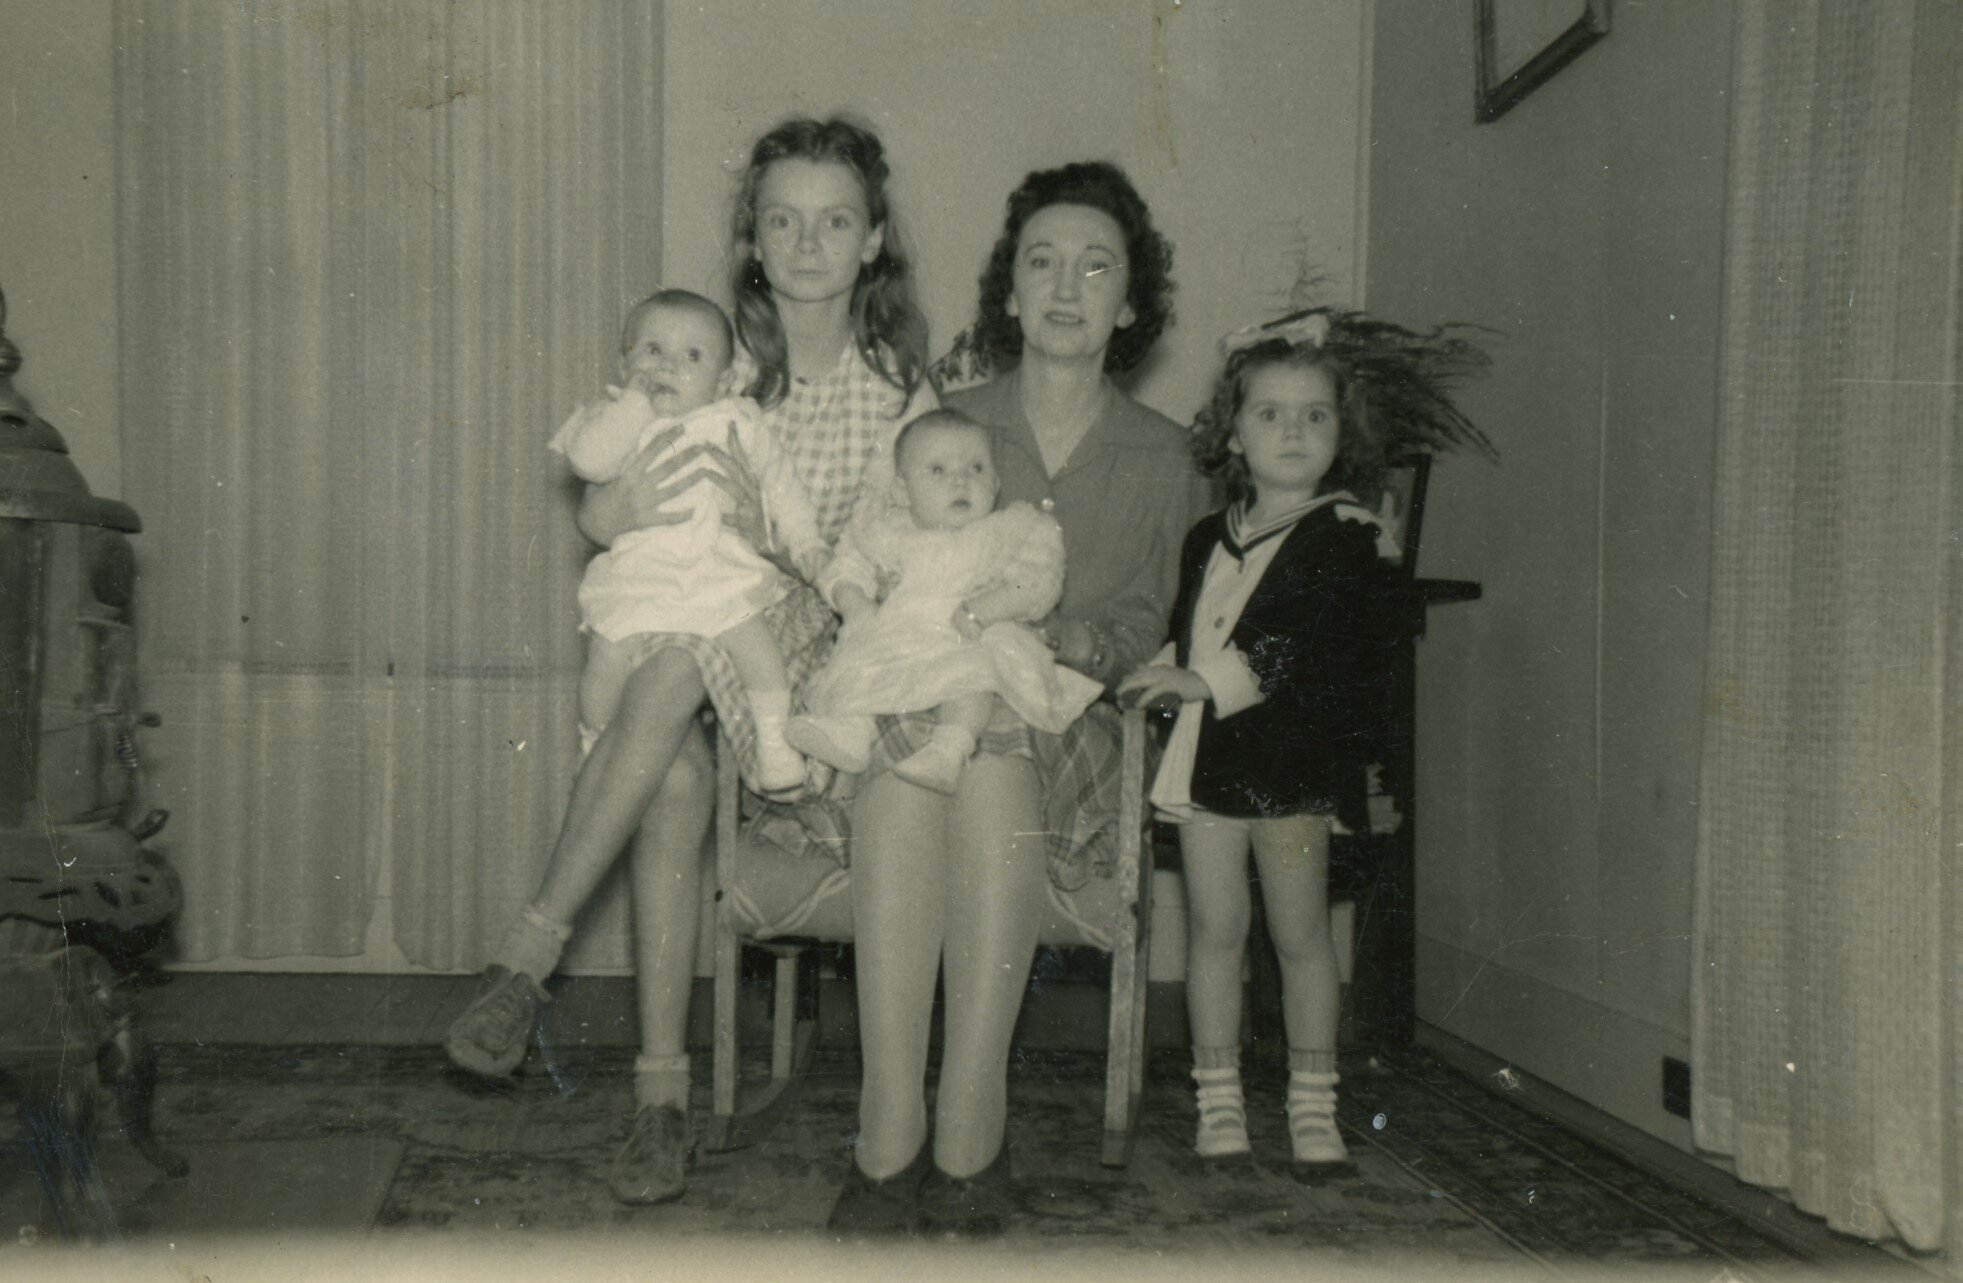 Sue Chadwick Hughes–Evelyn Chadwick Damren–Gertrude WatsonInfant on left Patricia Davis–Infant on right Ernest “Brother” Watson